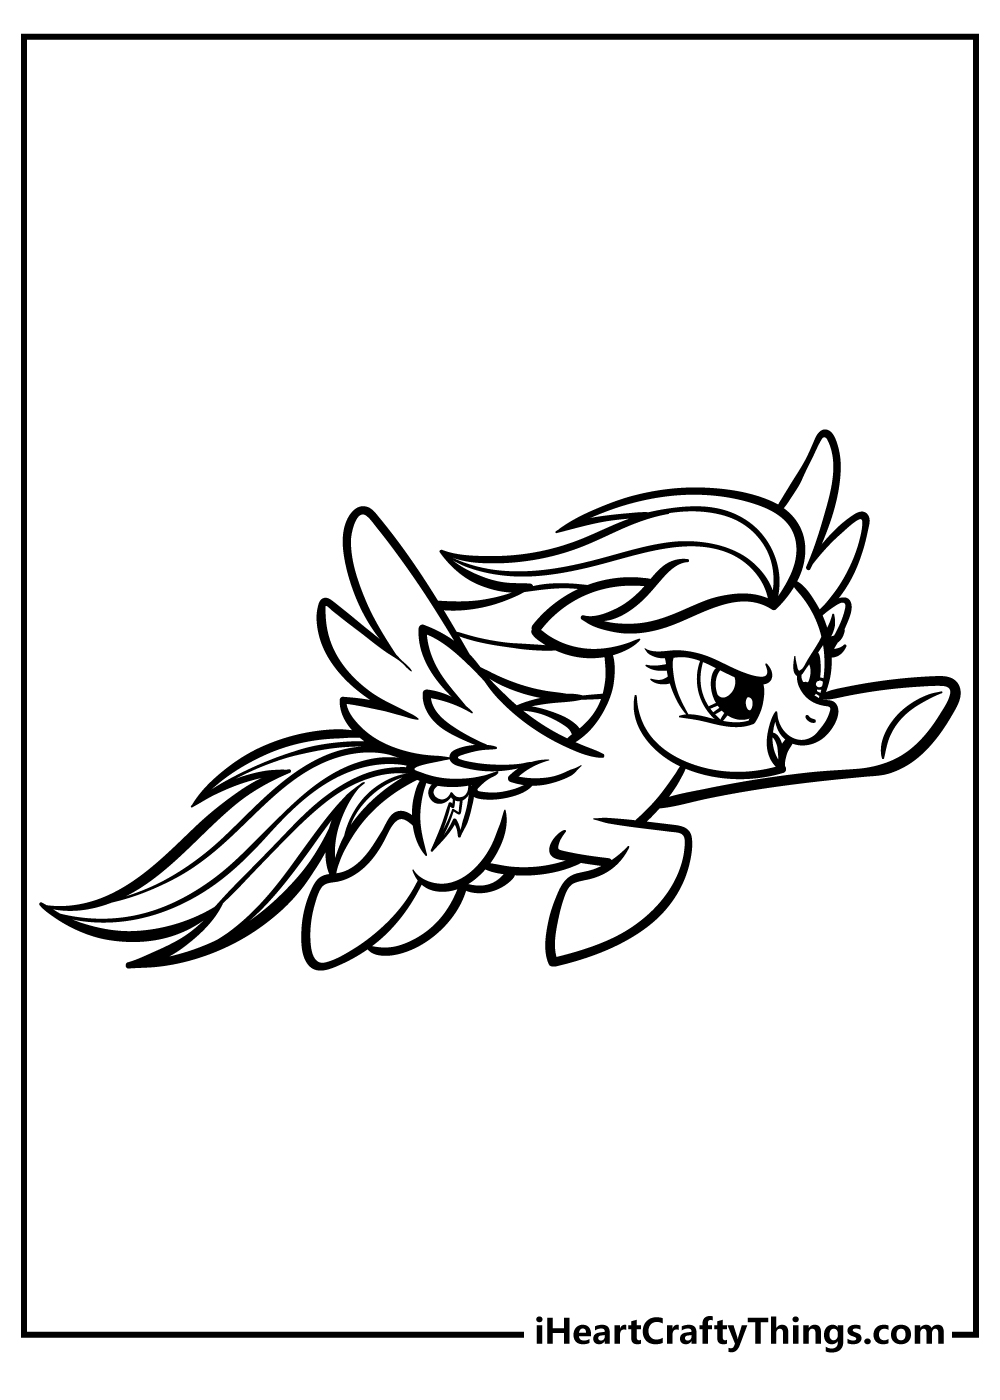 Rainbow Dash Coloring Pages for adults free printable